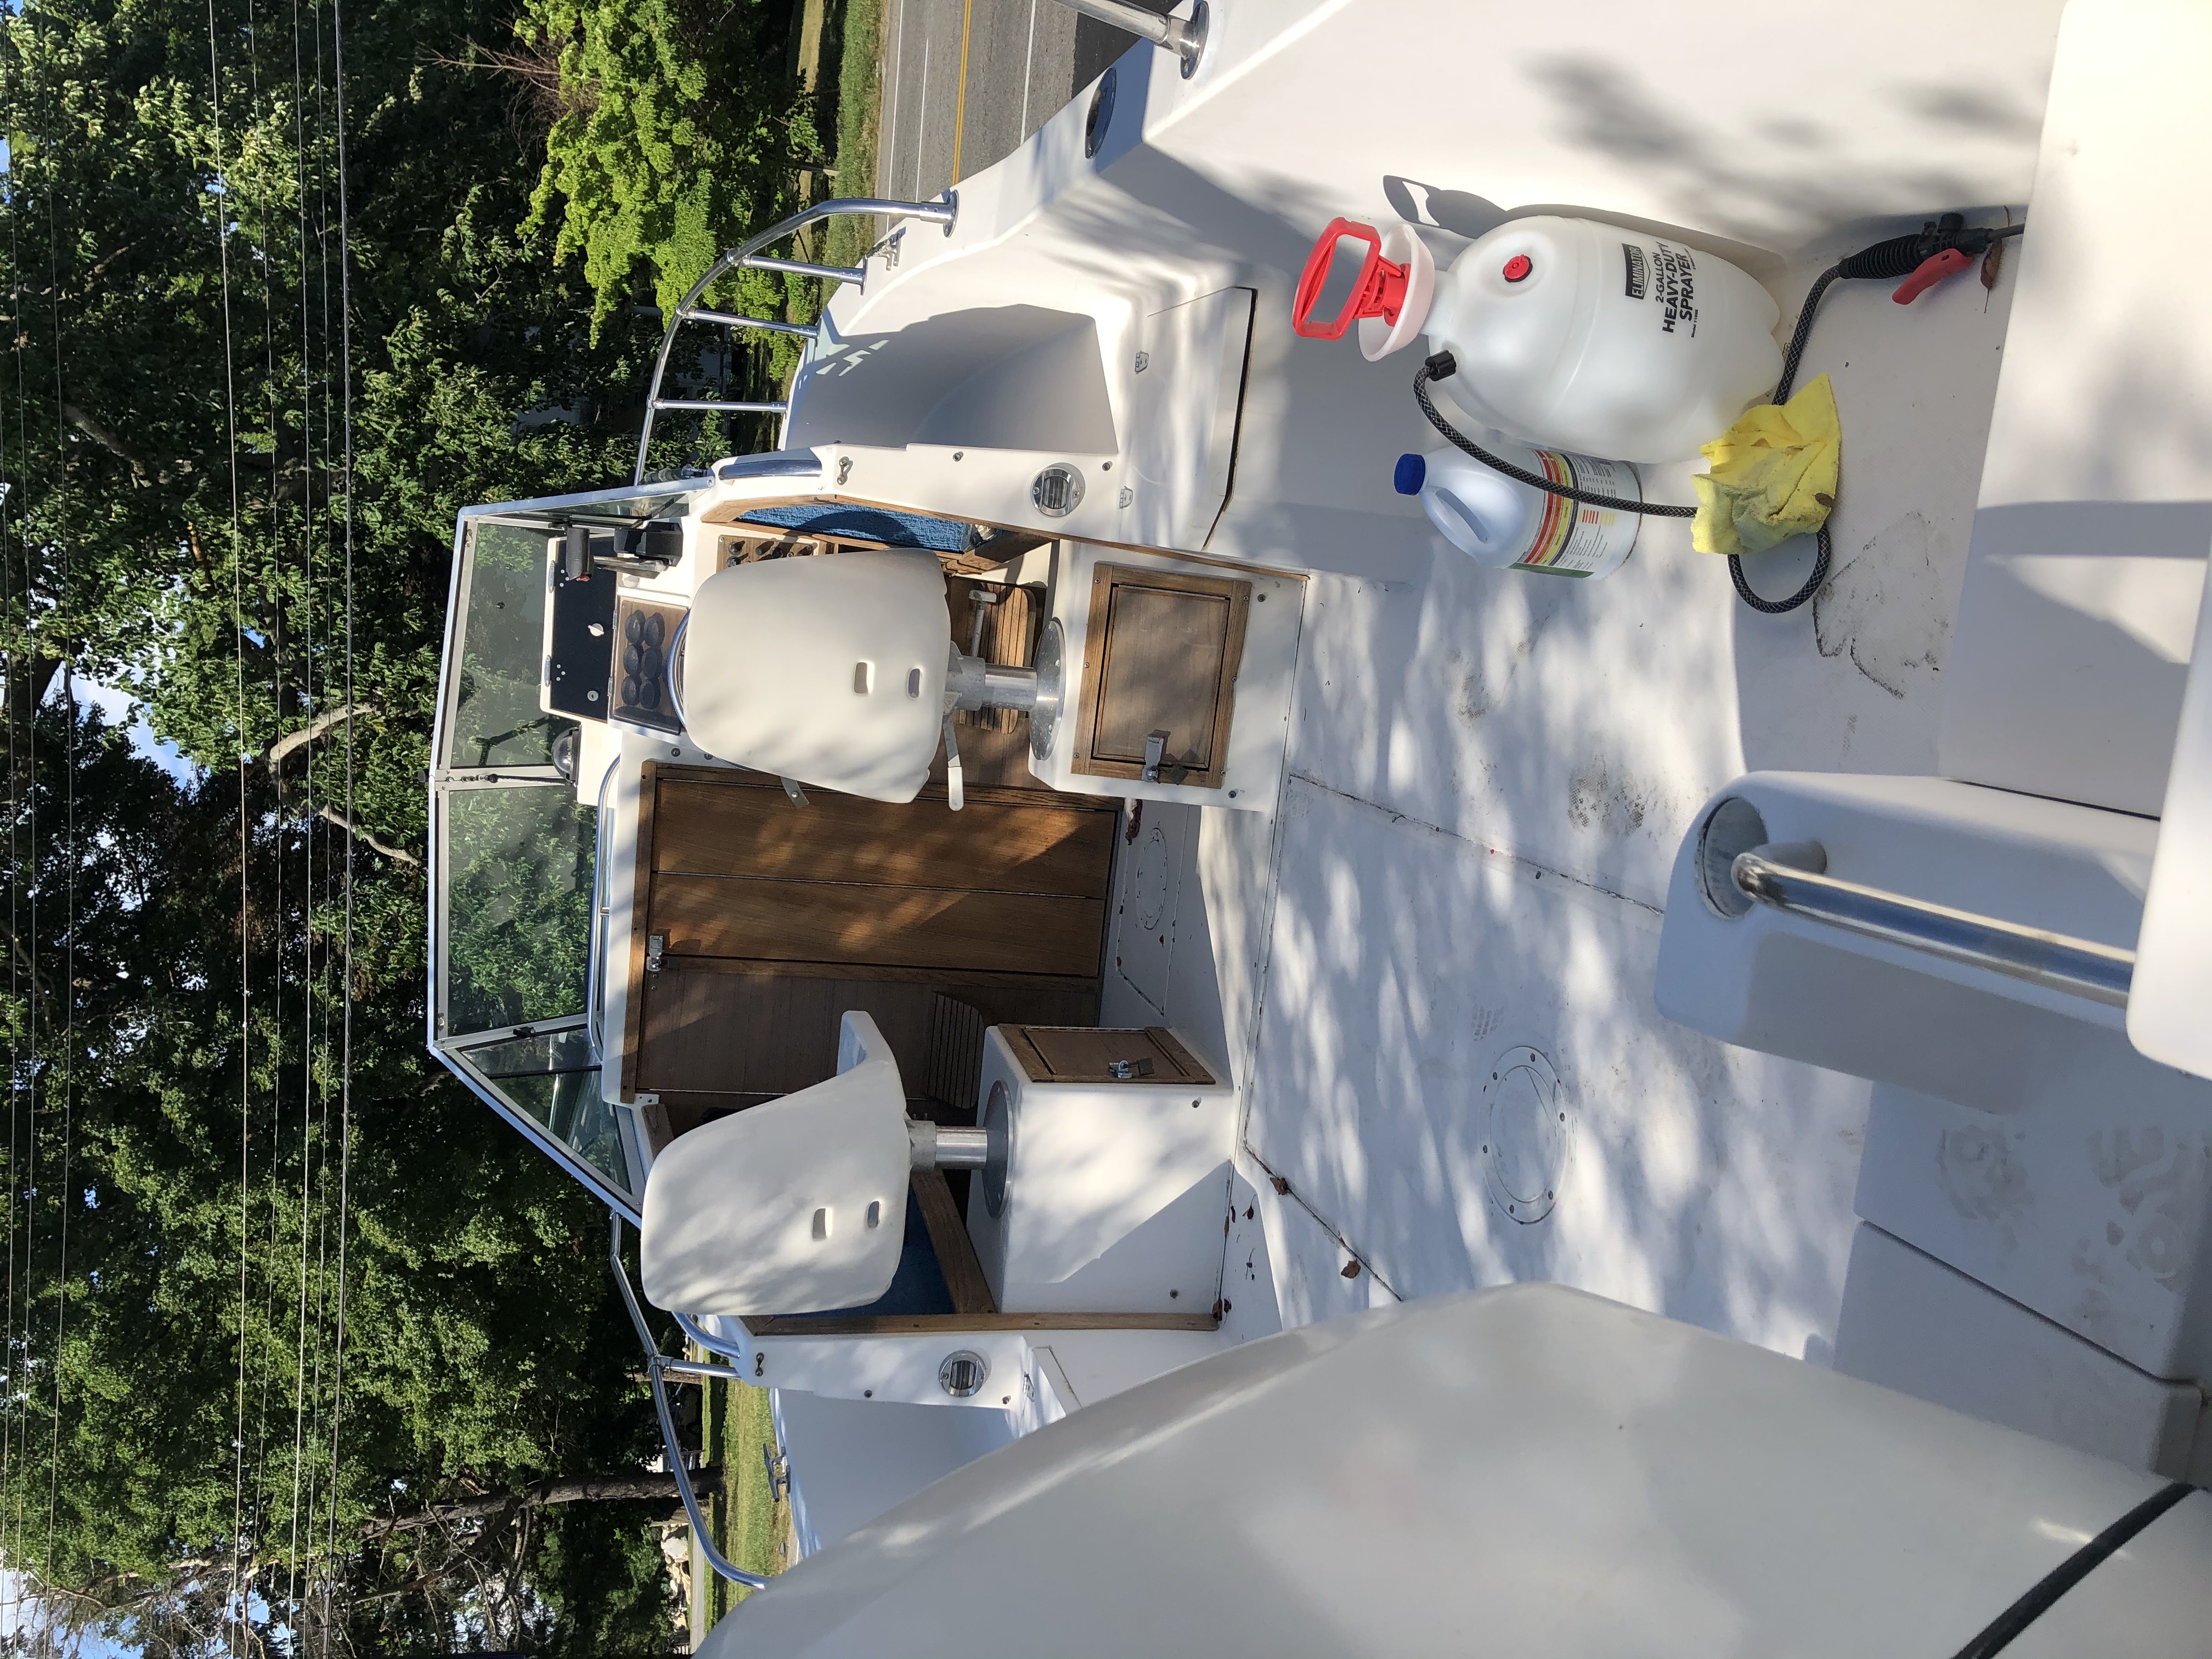 1989 Grady-White 20' Overnighter Power boat for sale in Kent Lakes, NY - image 1 